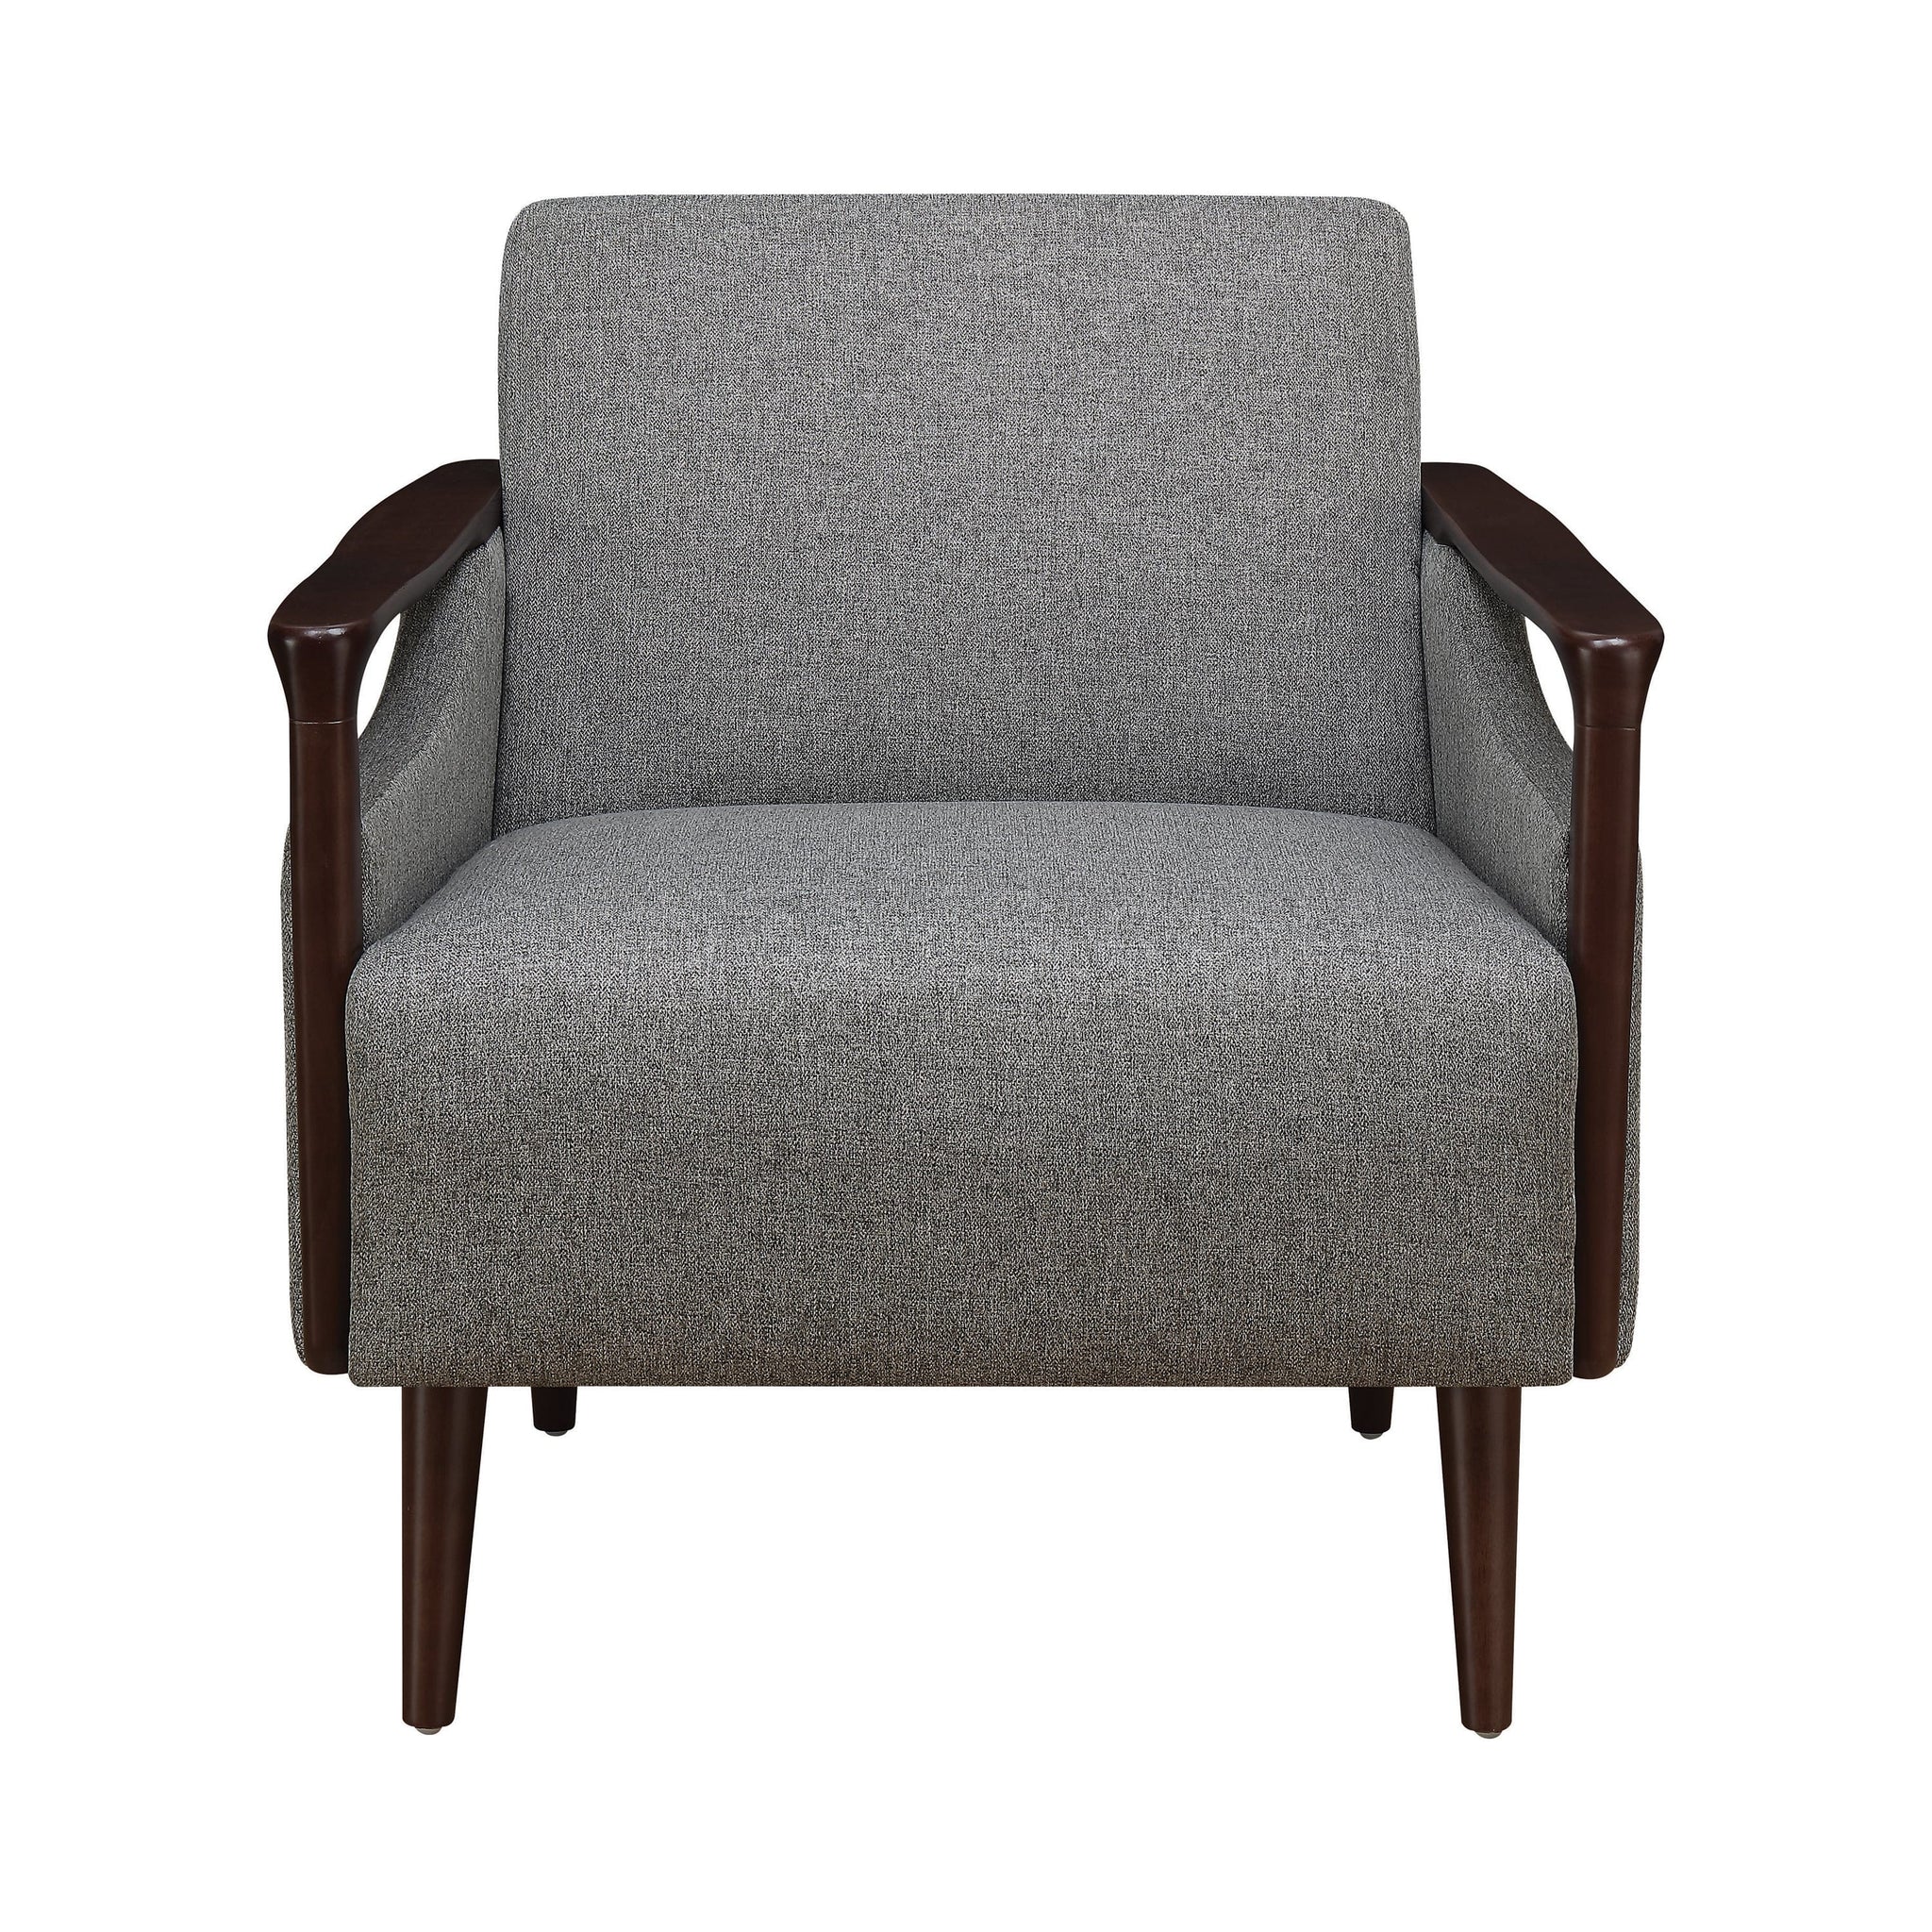 Upholstered Accent Chair Grey And Brown - 905392